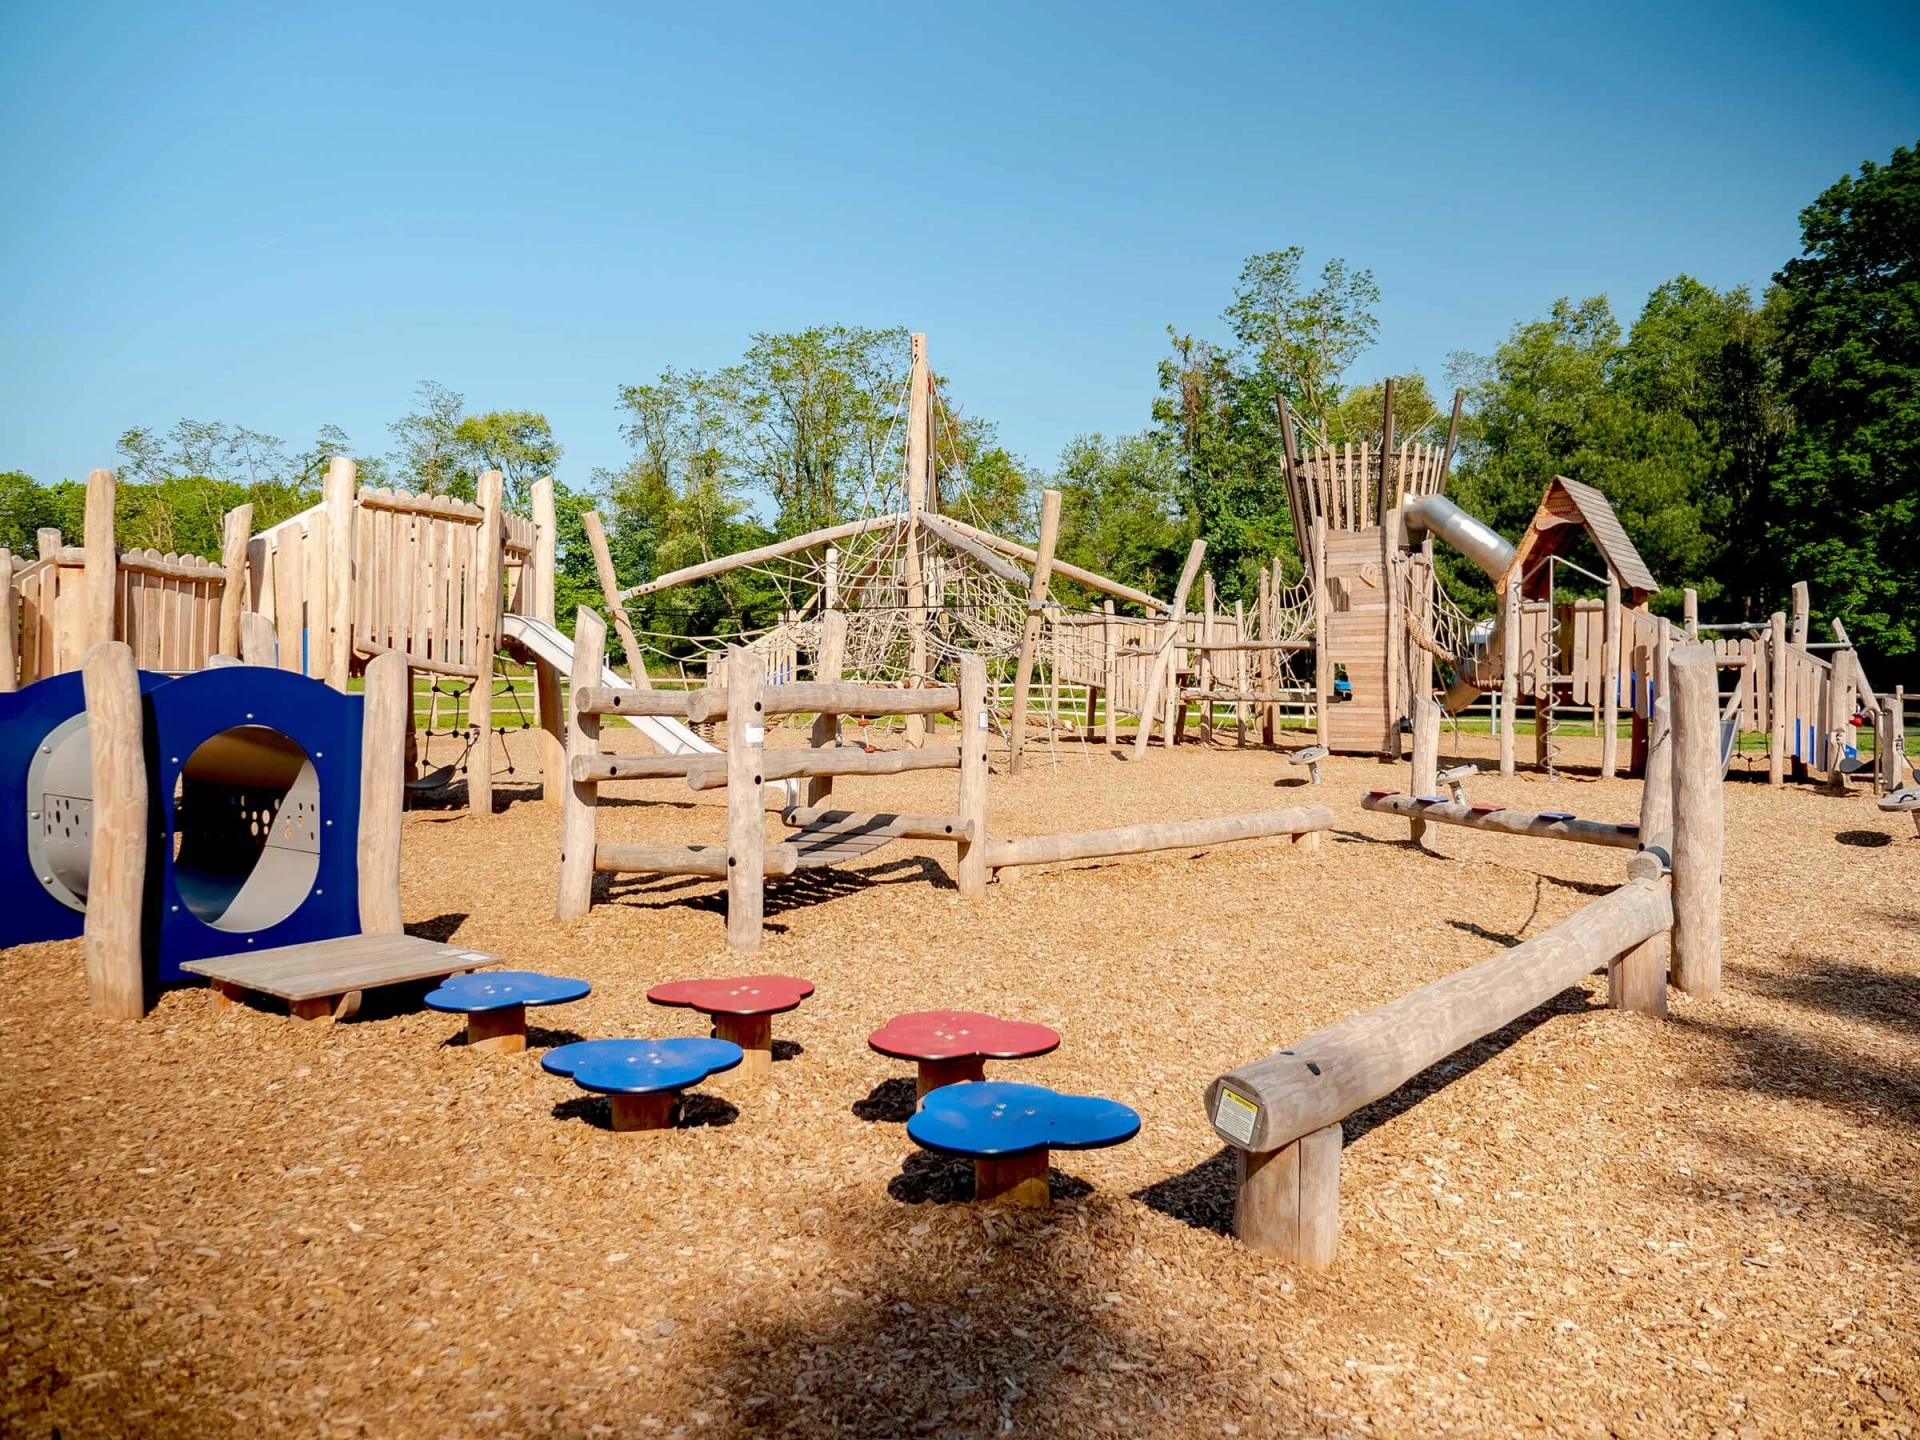 Wooden playground with balancing and climbing playground equipment in a shool